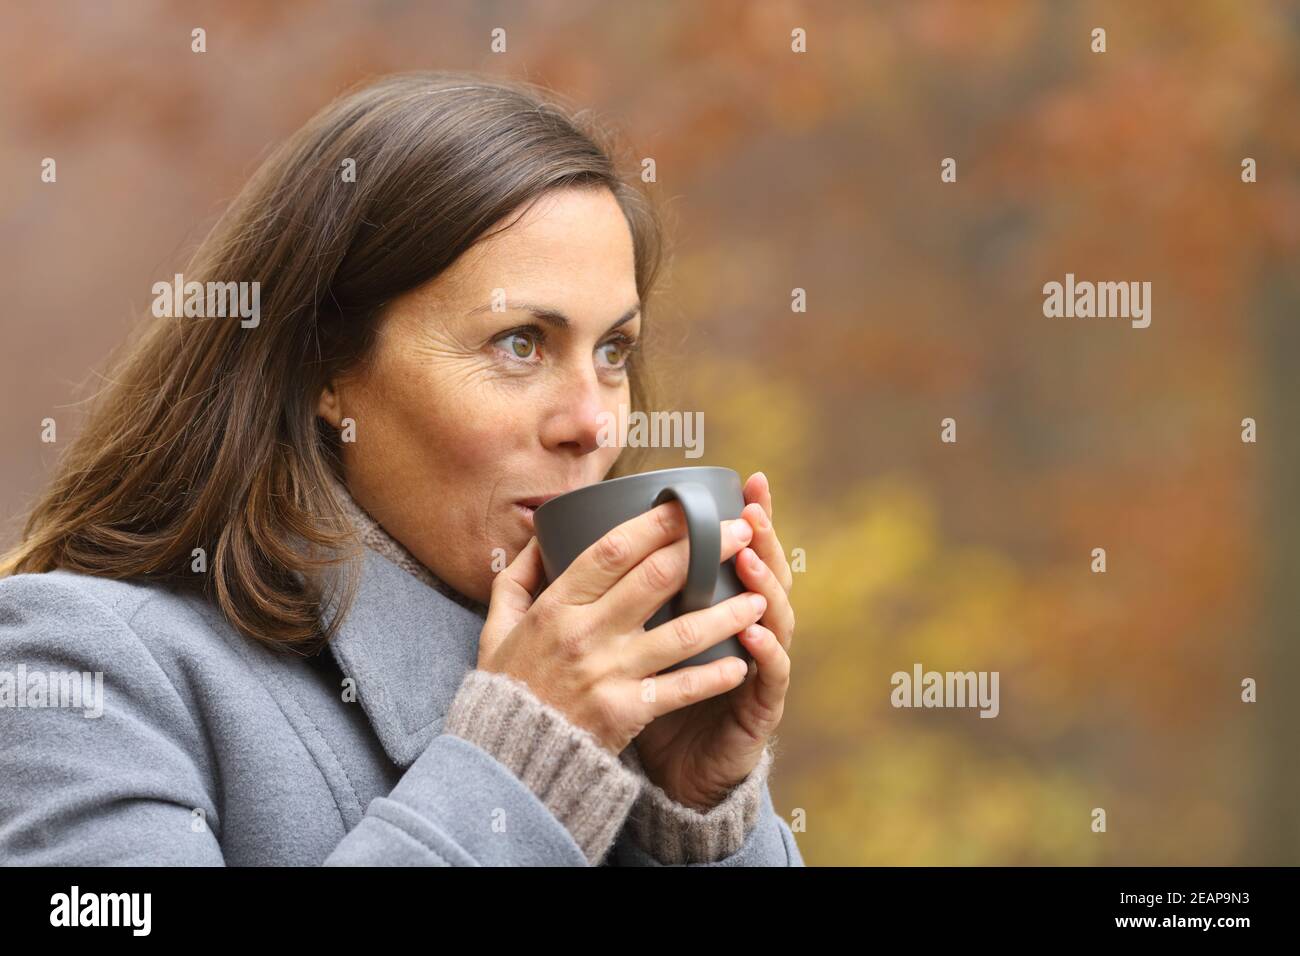 Adult woman drinking coffee in a park in autumn Stock Photo